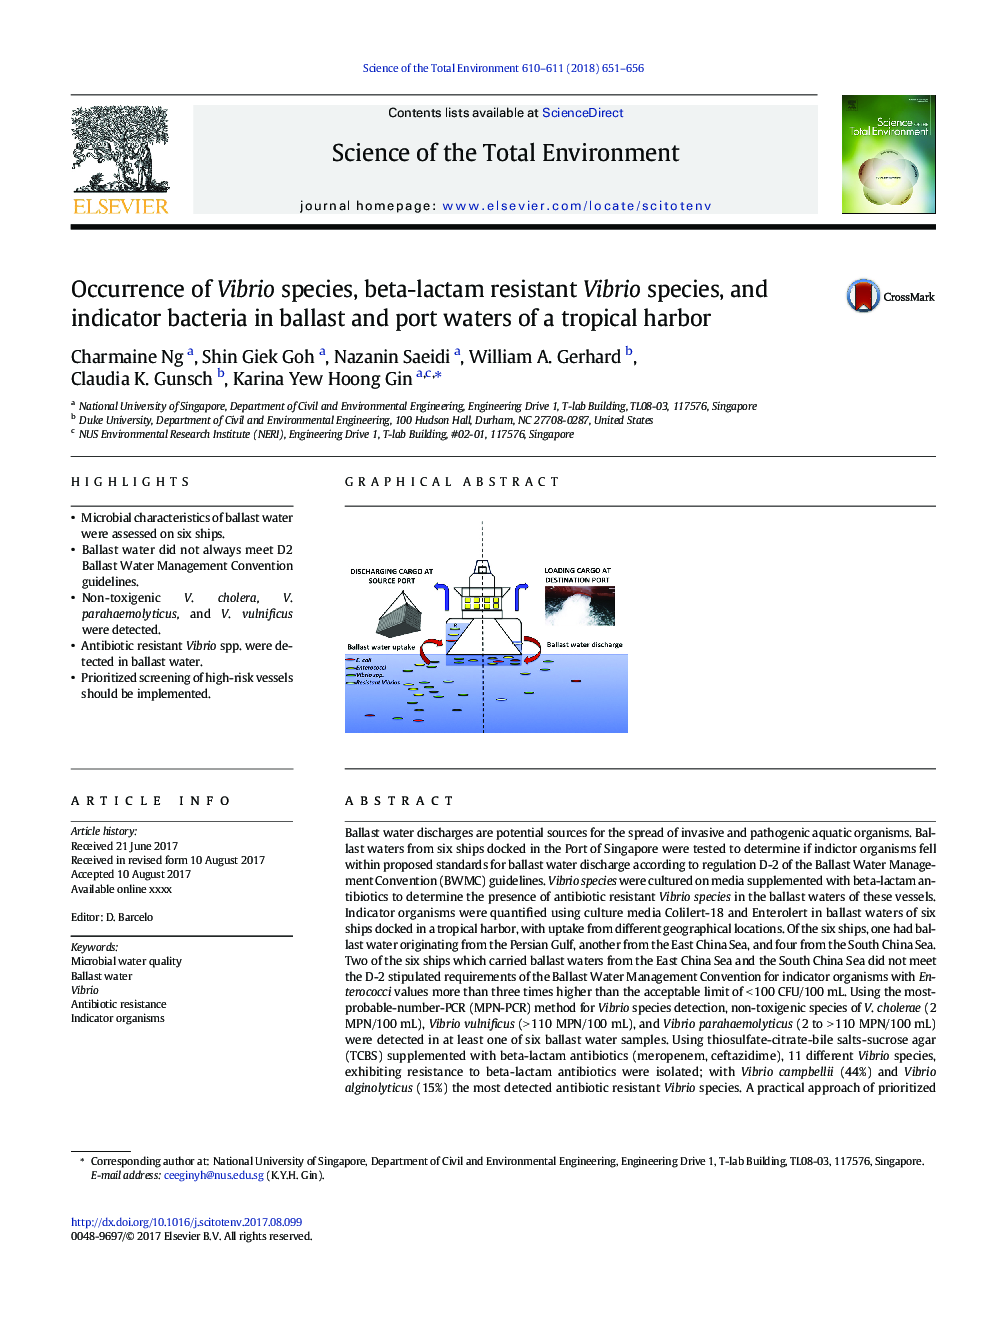 Occurrence of Vibrio species, beta-lactam resistant Vibrio species, and indicator bacteria in ballast and port waters of a tropical harbor